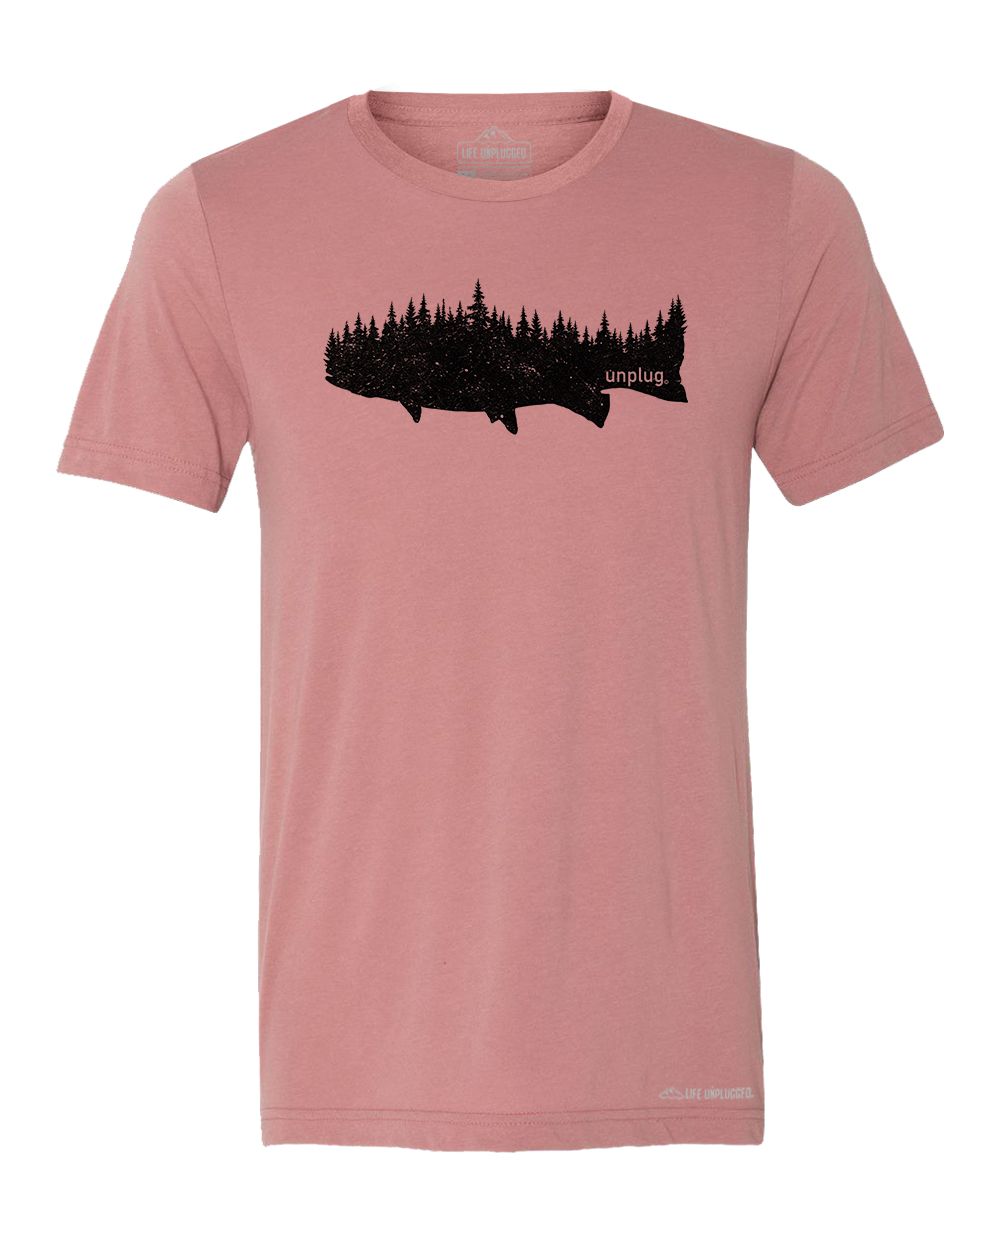 Trout in The Trees Premium Triblend T-Shirt